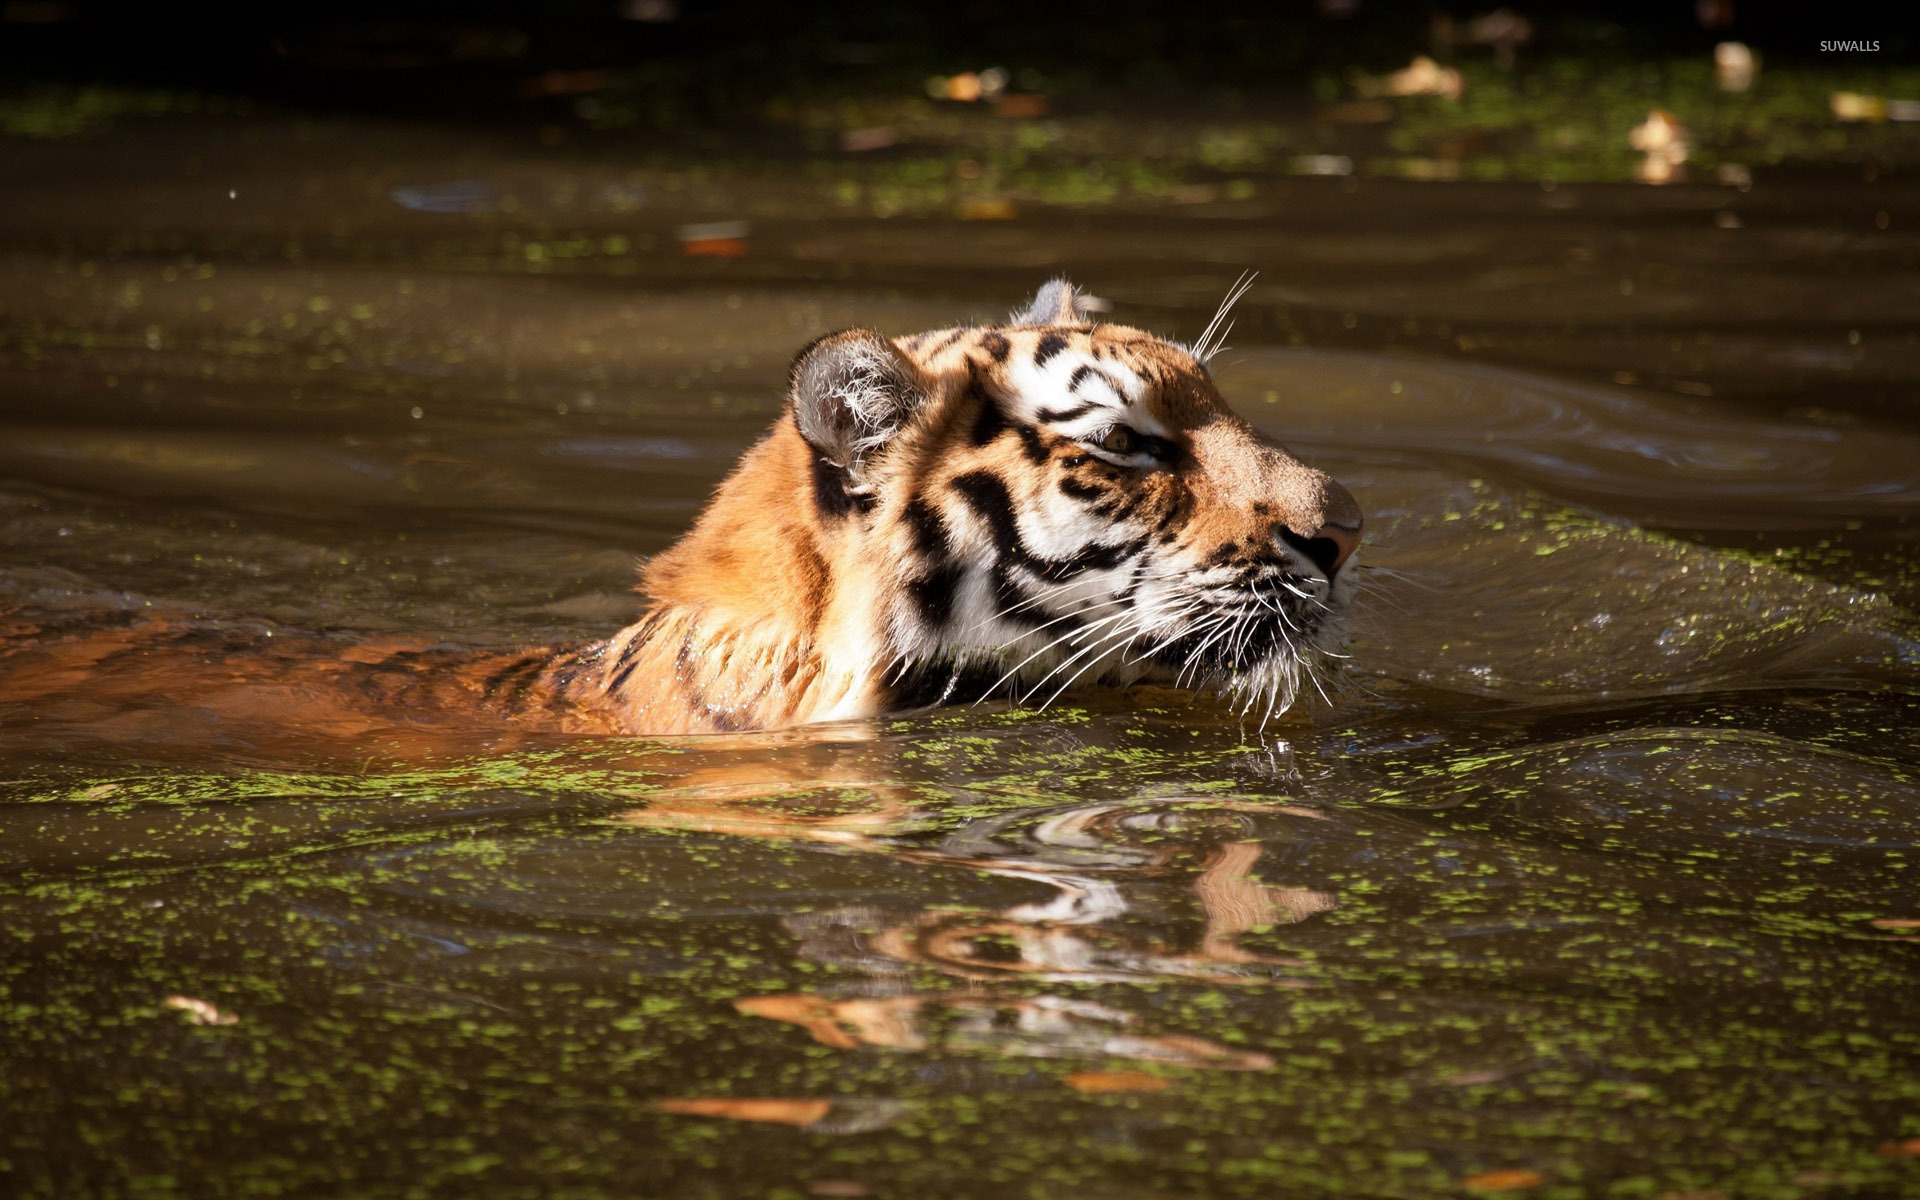 Tiger swimming in dirty water wallpaper - Animal wallpapers - #49476